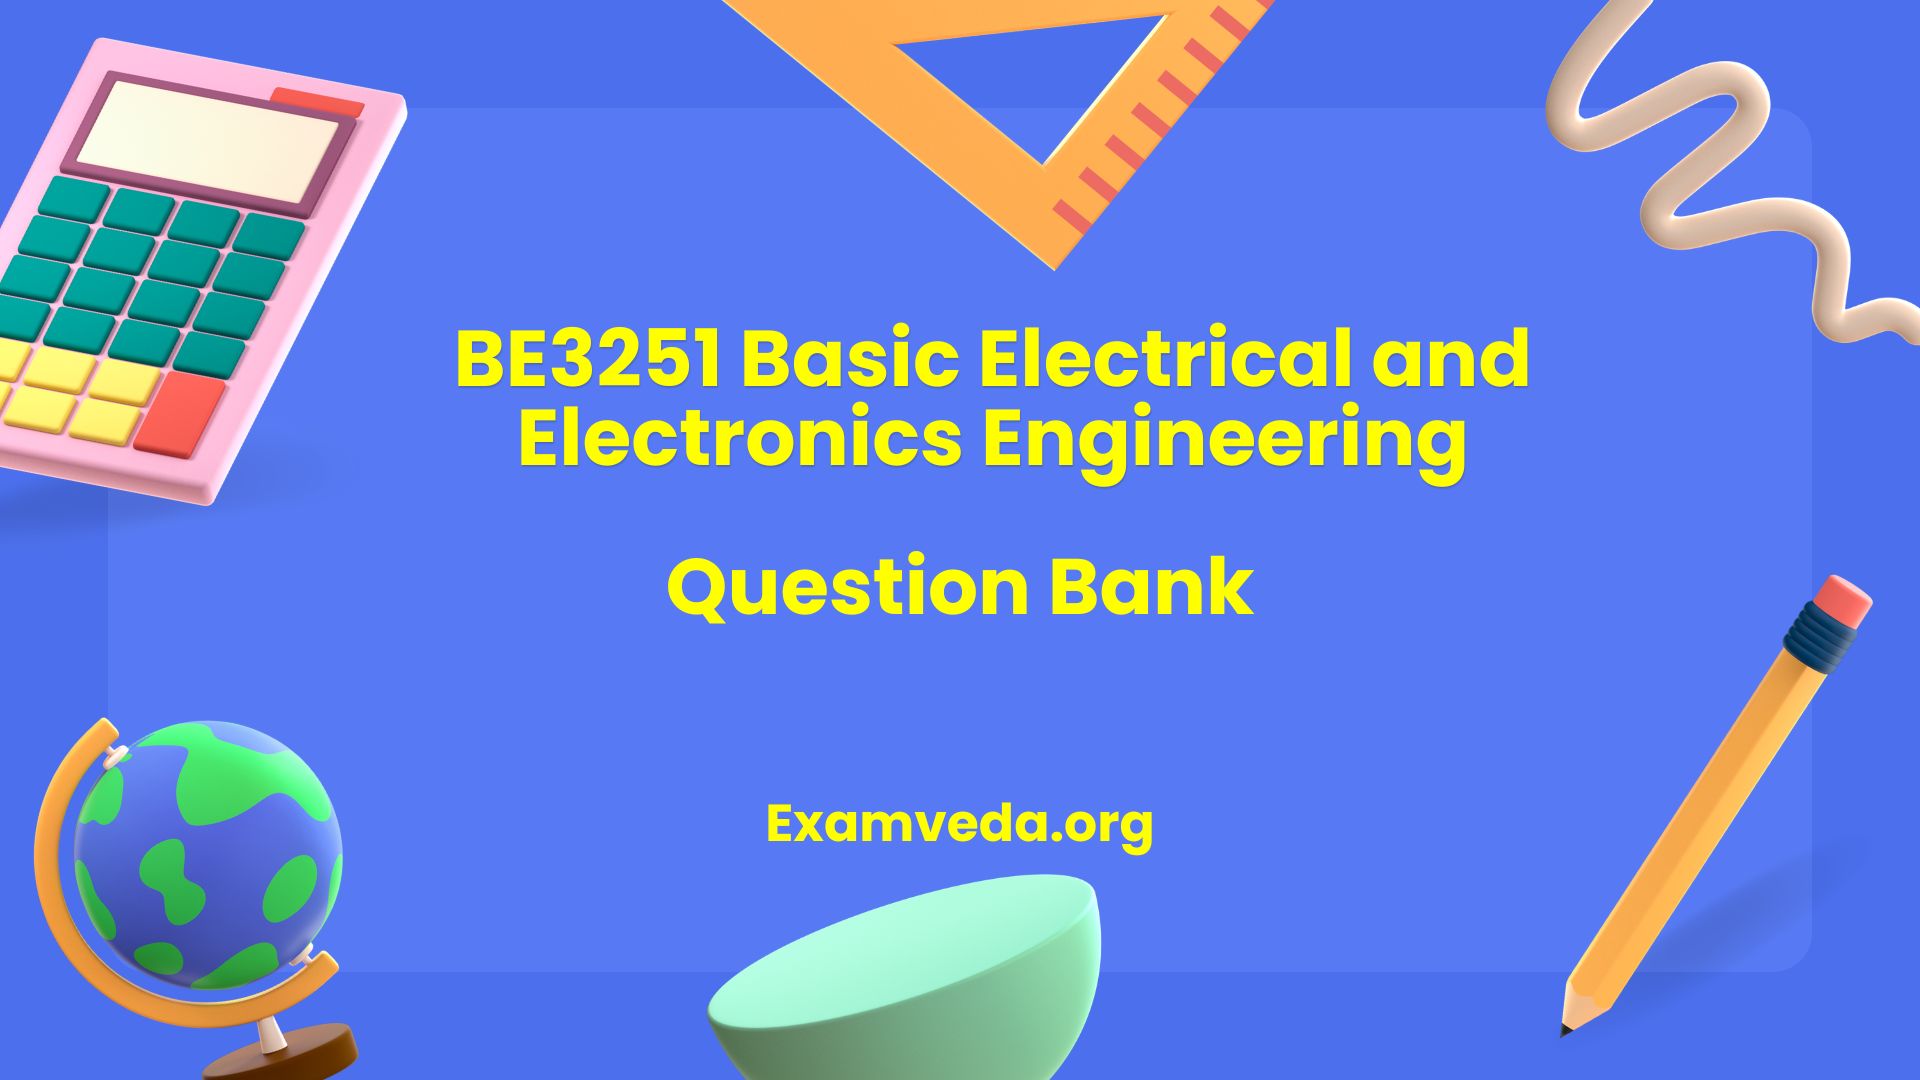 BE3251 Basic Electrical and Electronics Engineering Question Bank